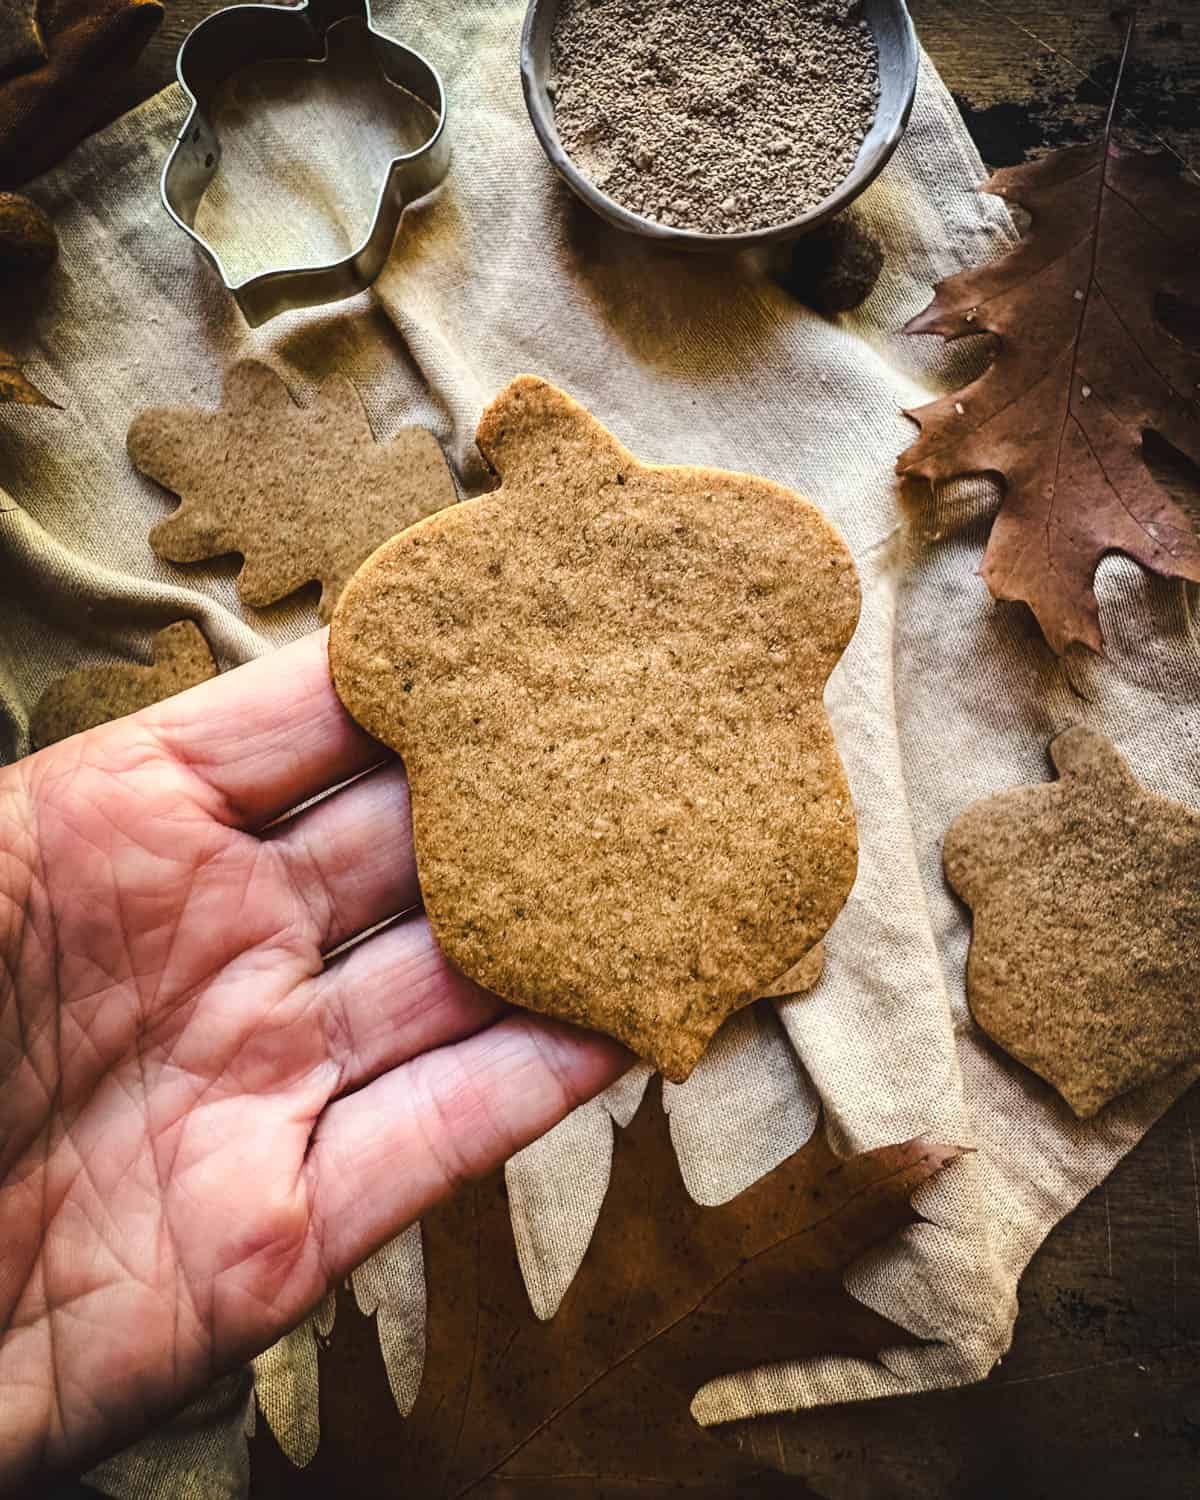 An acorn shaped cookie being held up by a hand, top view.